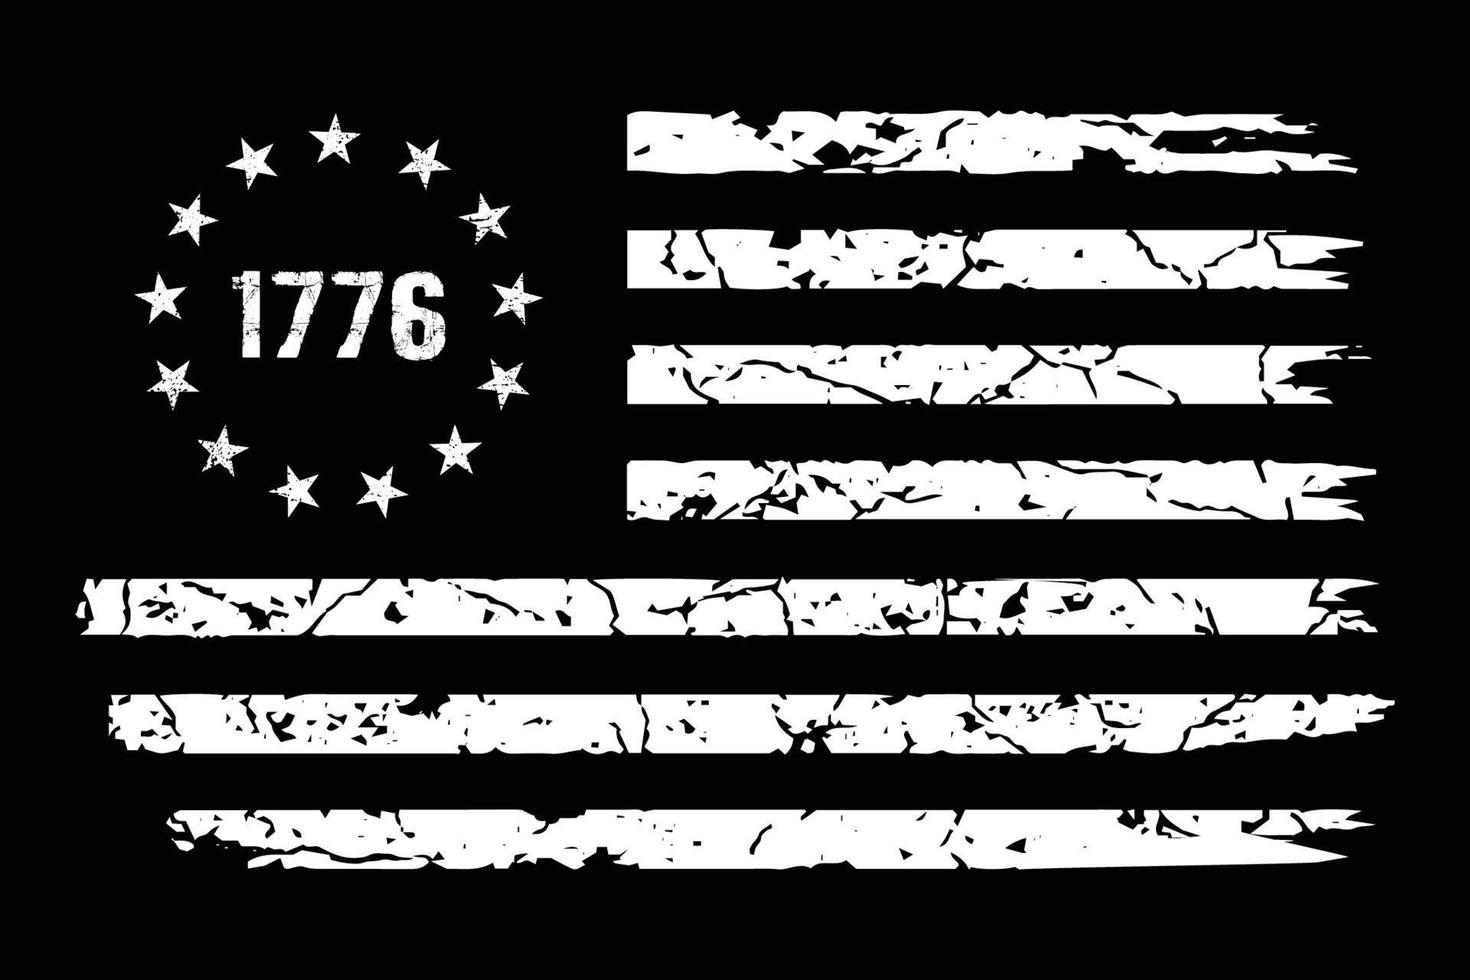 1776 Betsy Ross Distressed Flag Design vector